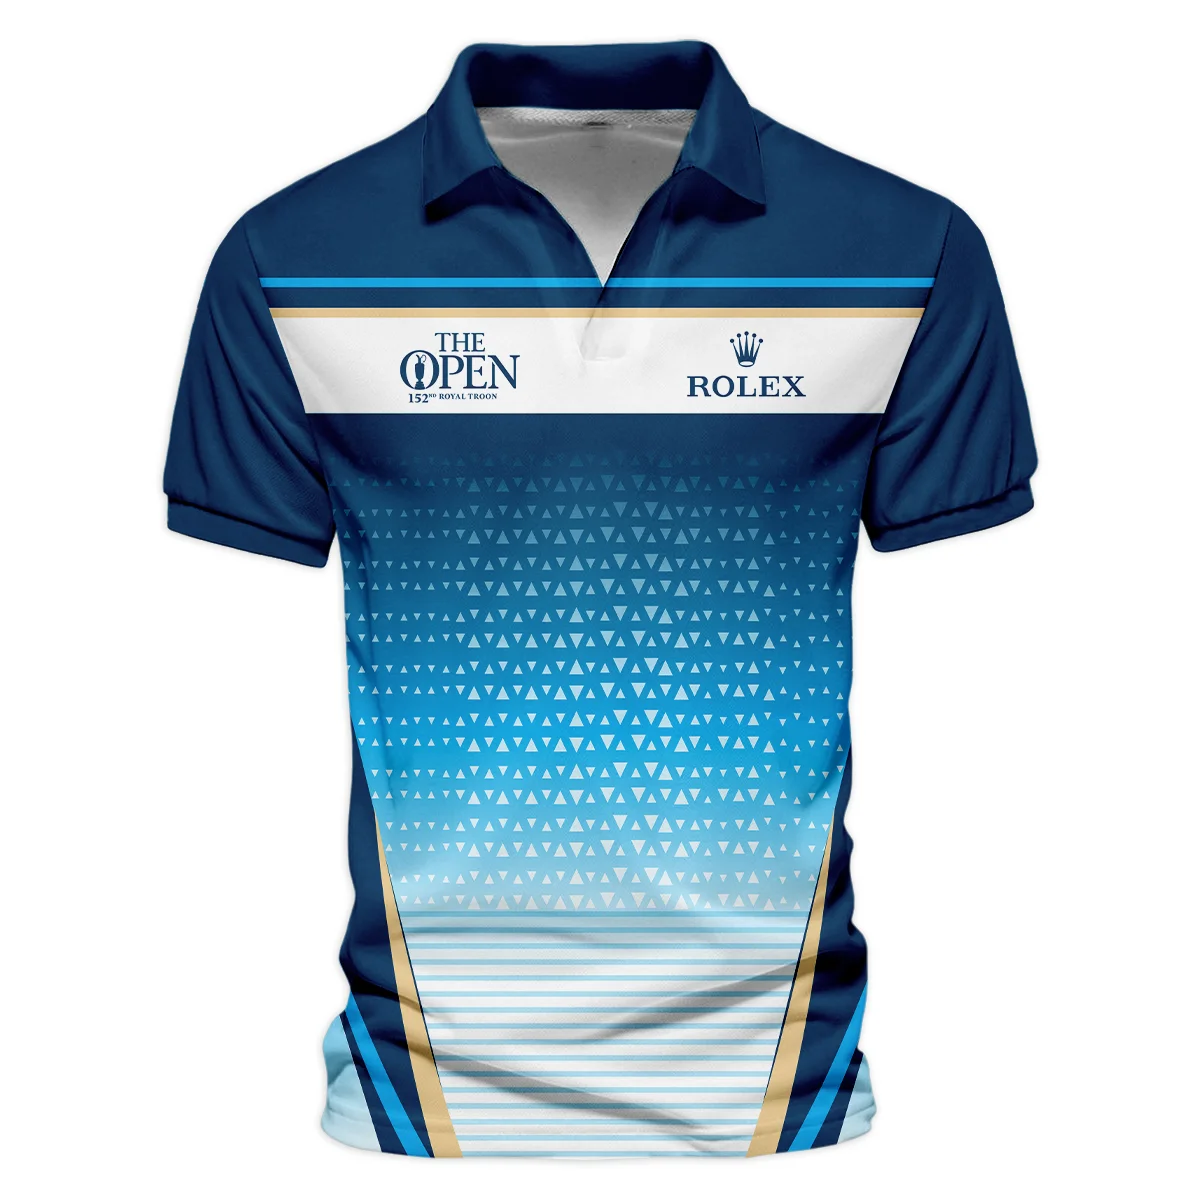 152nd The Open Championship Golf Blue Yellow White Pattern Background Rolex Vneck Polo Shirt All Over Prints  HOTOP250624A01ROXZVPL